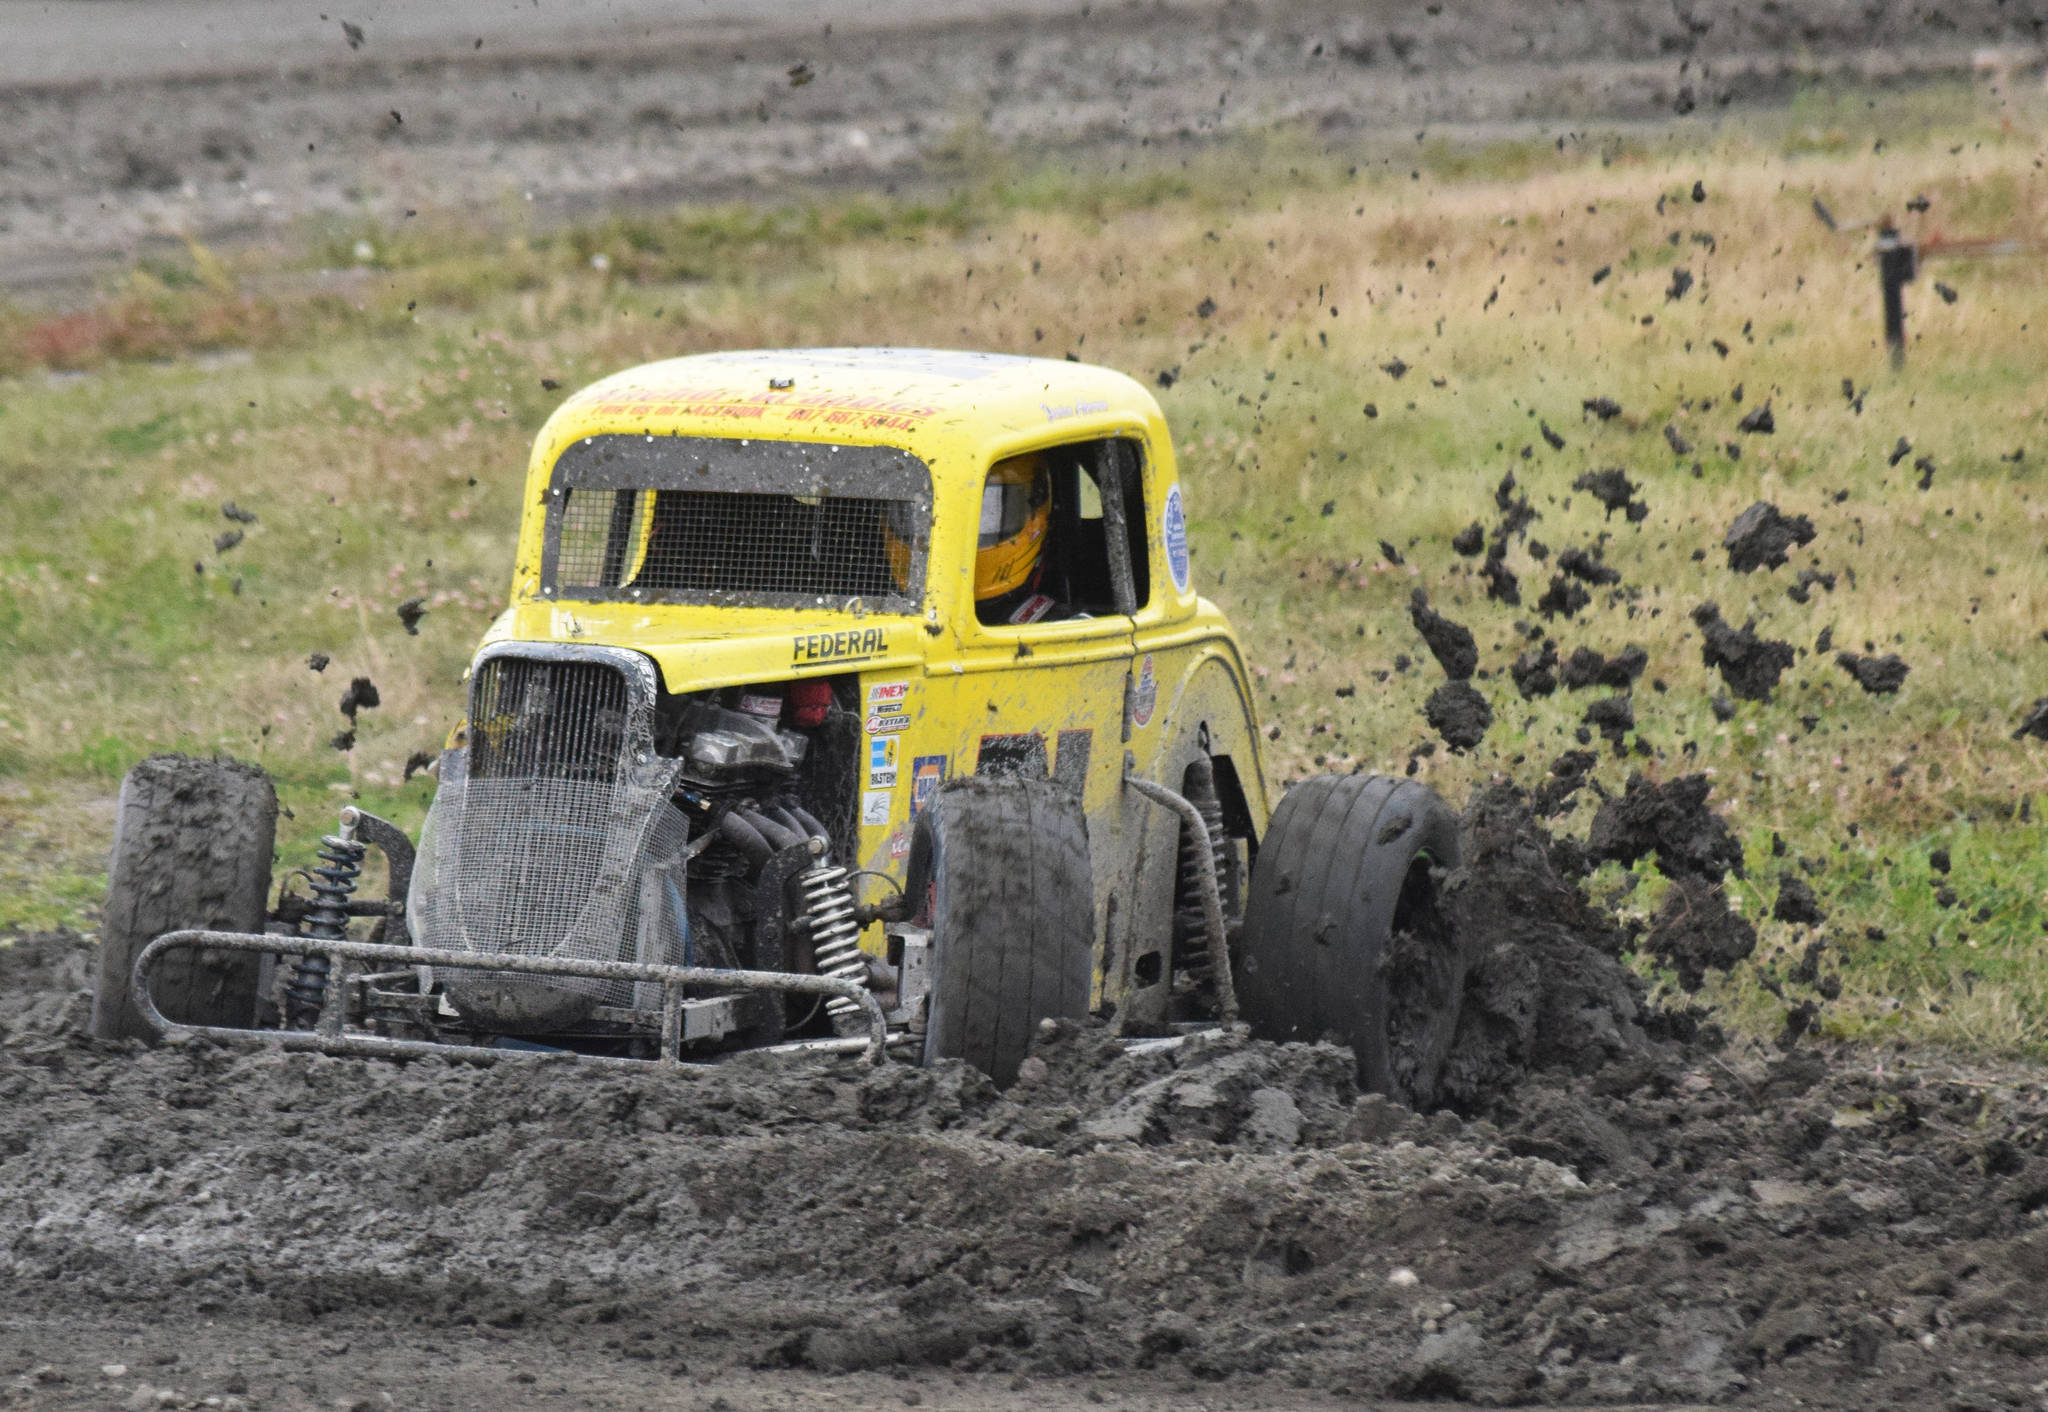 Damien Ackerman spins into the mud during a Legends heat race Friday, Sept. 6, 2019, at Twin City Raceway in Kenai, Alaska. (Photo by Joey Klecka/Peninsula Clarion)